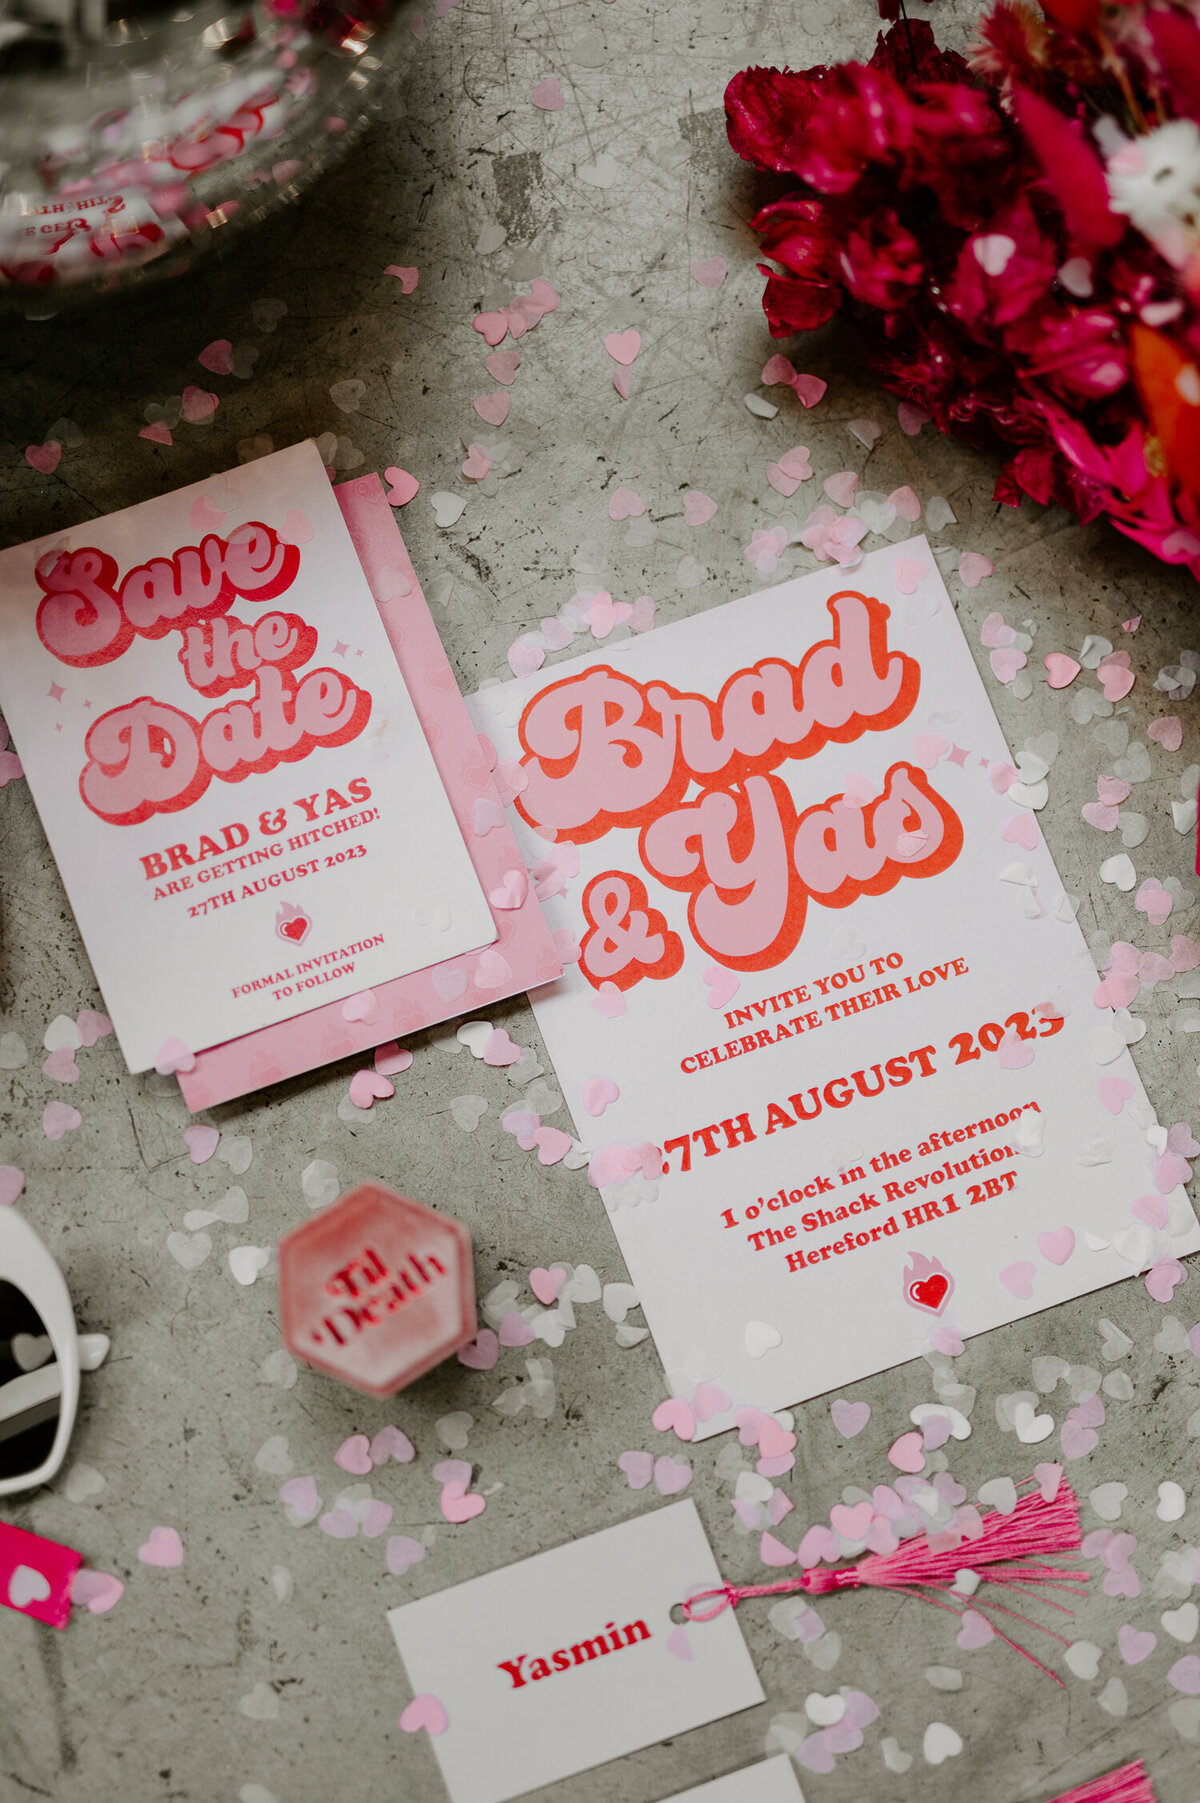 Pink 70s wedding stationery and other details lay on the concrete floor of the shack revolution.